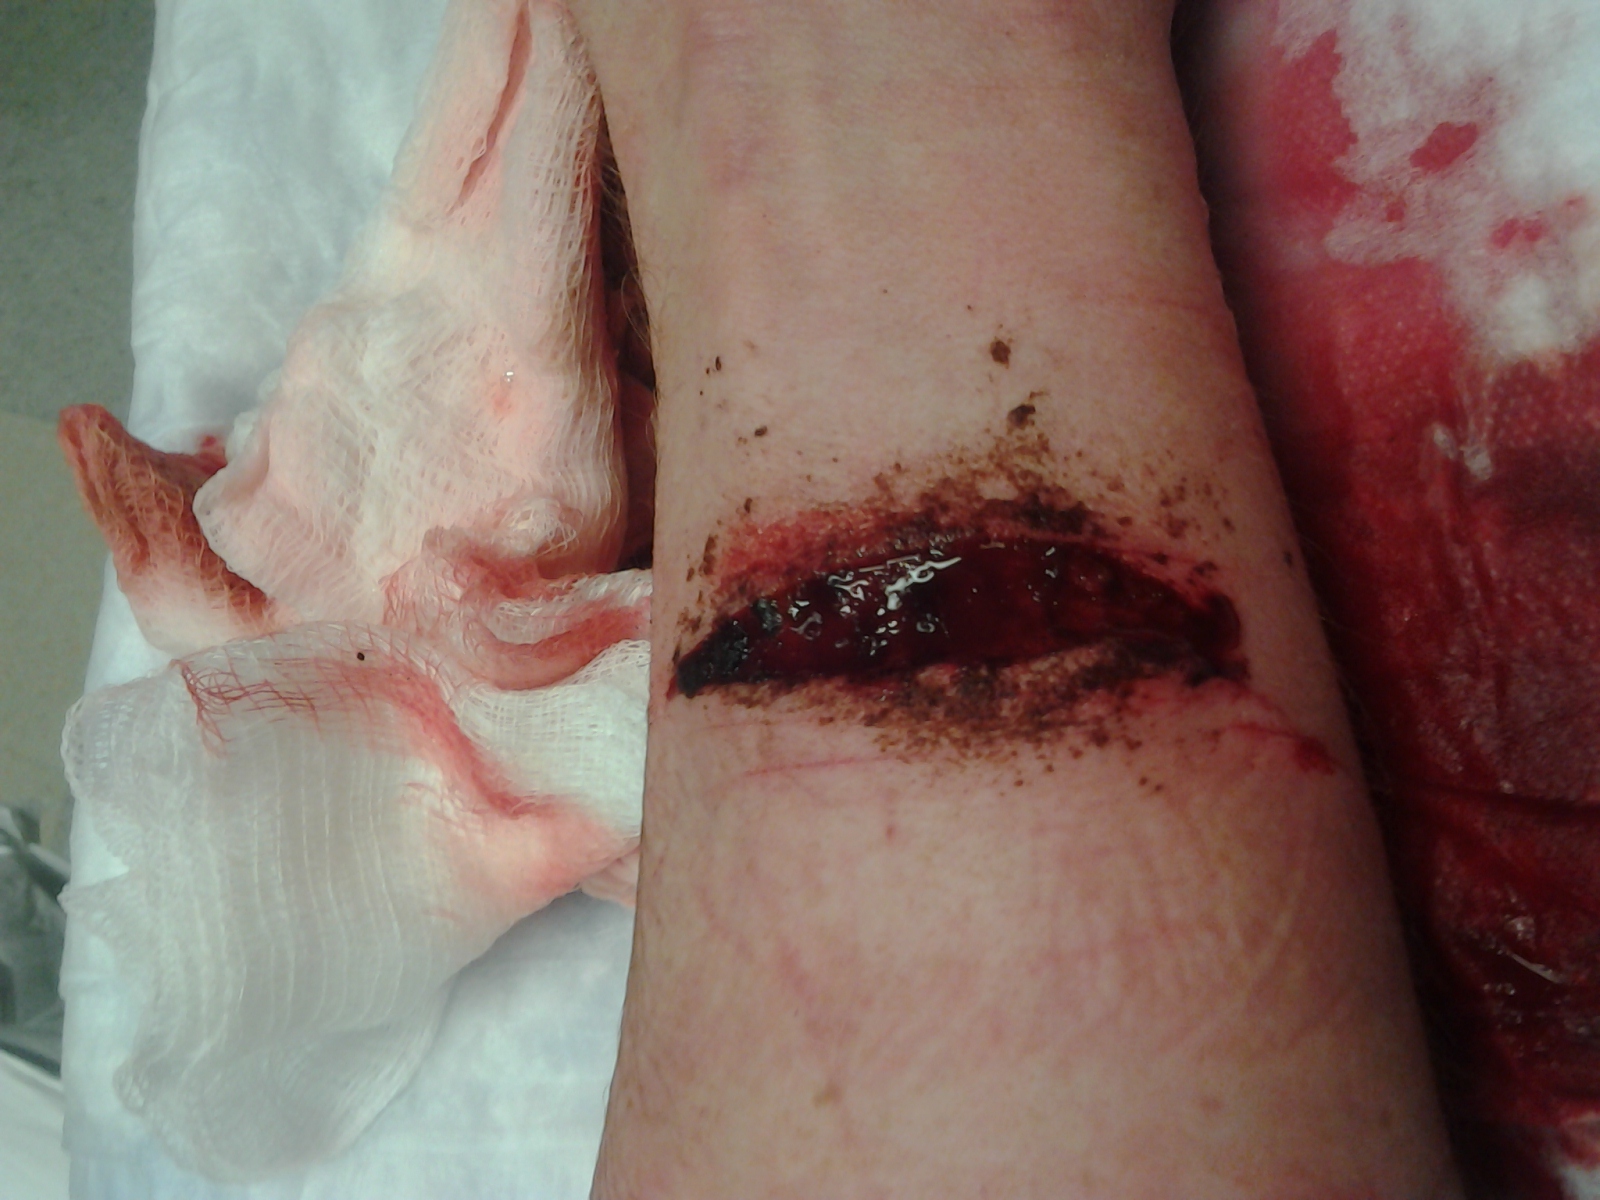 After they cleaned the wound I could see my tendons moving.